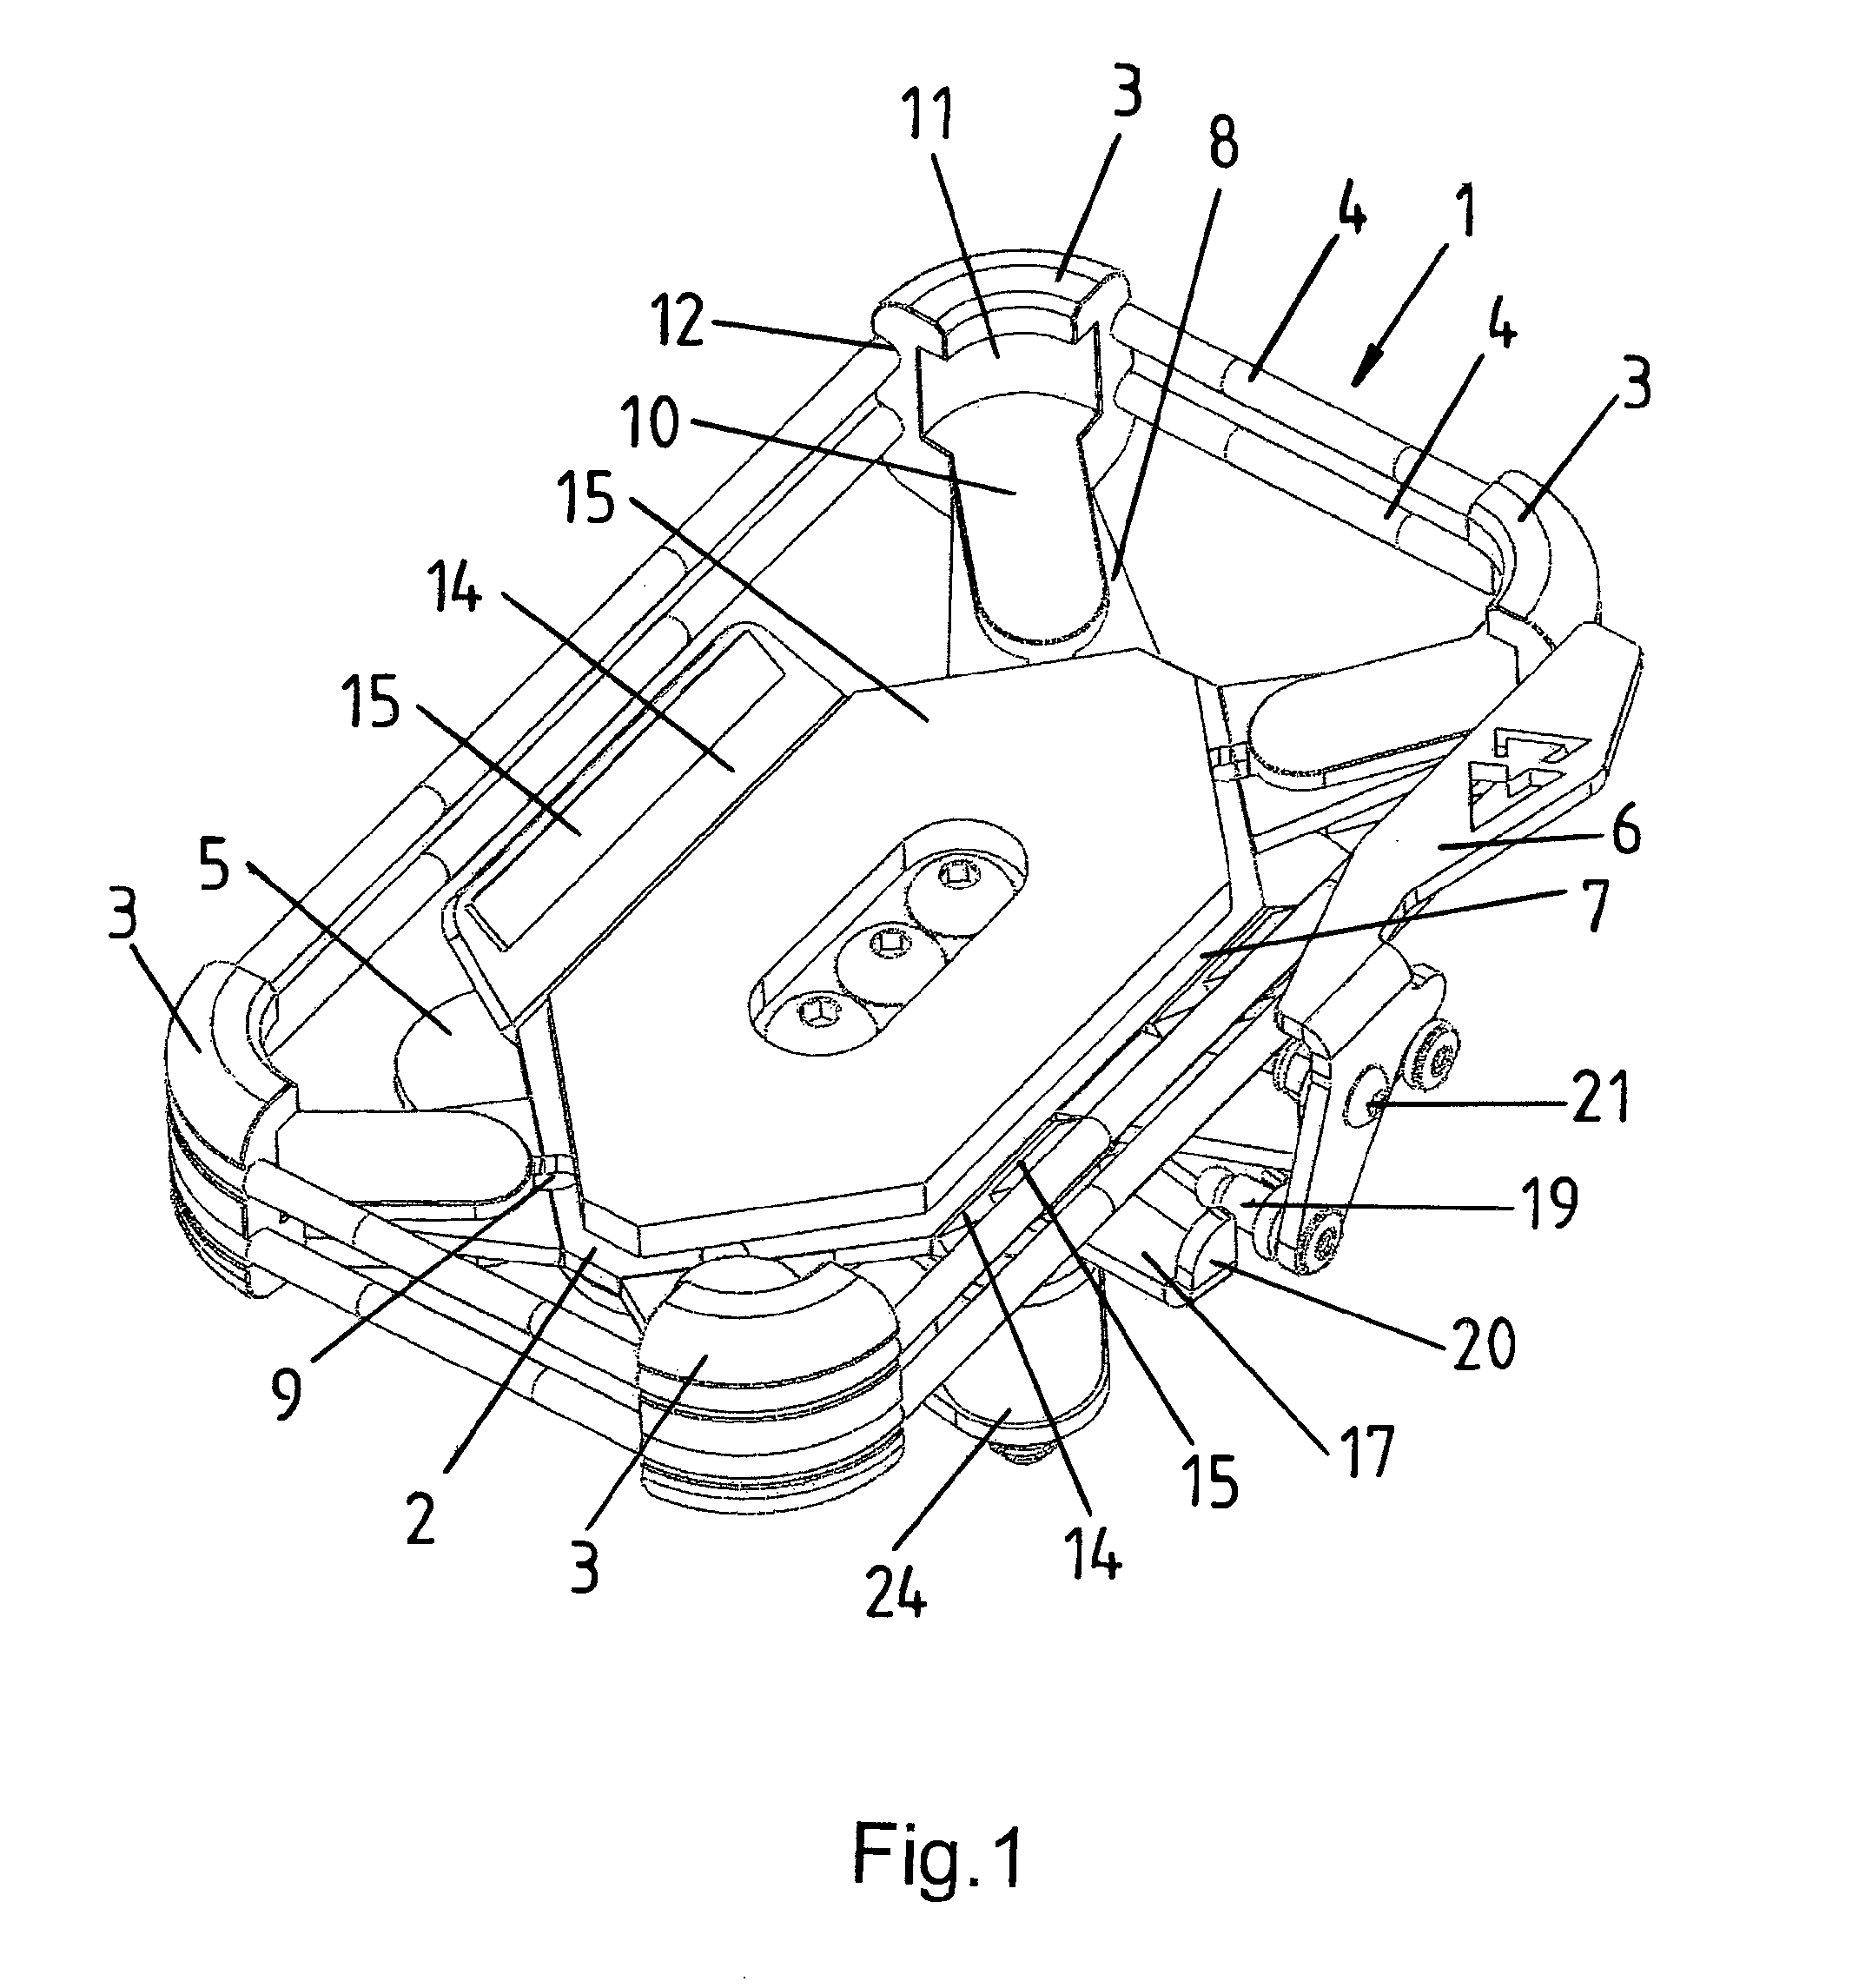 Retaining system for fastening an electronic auxiliary device